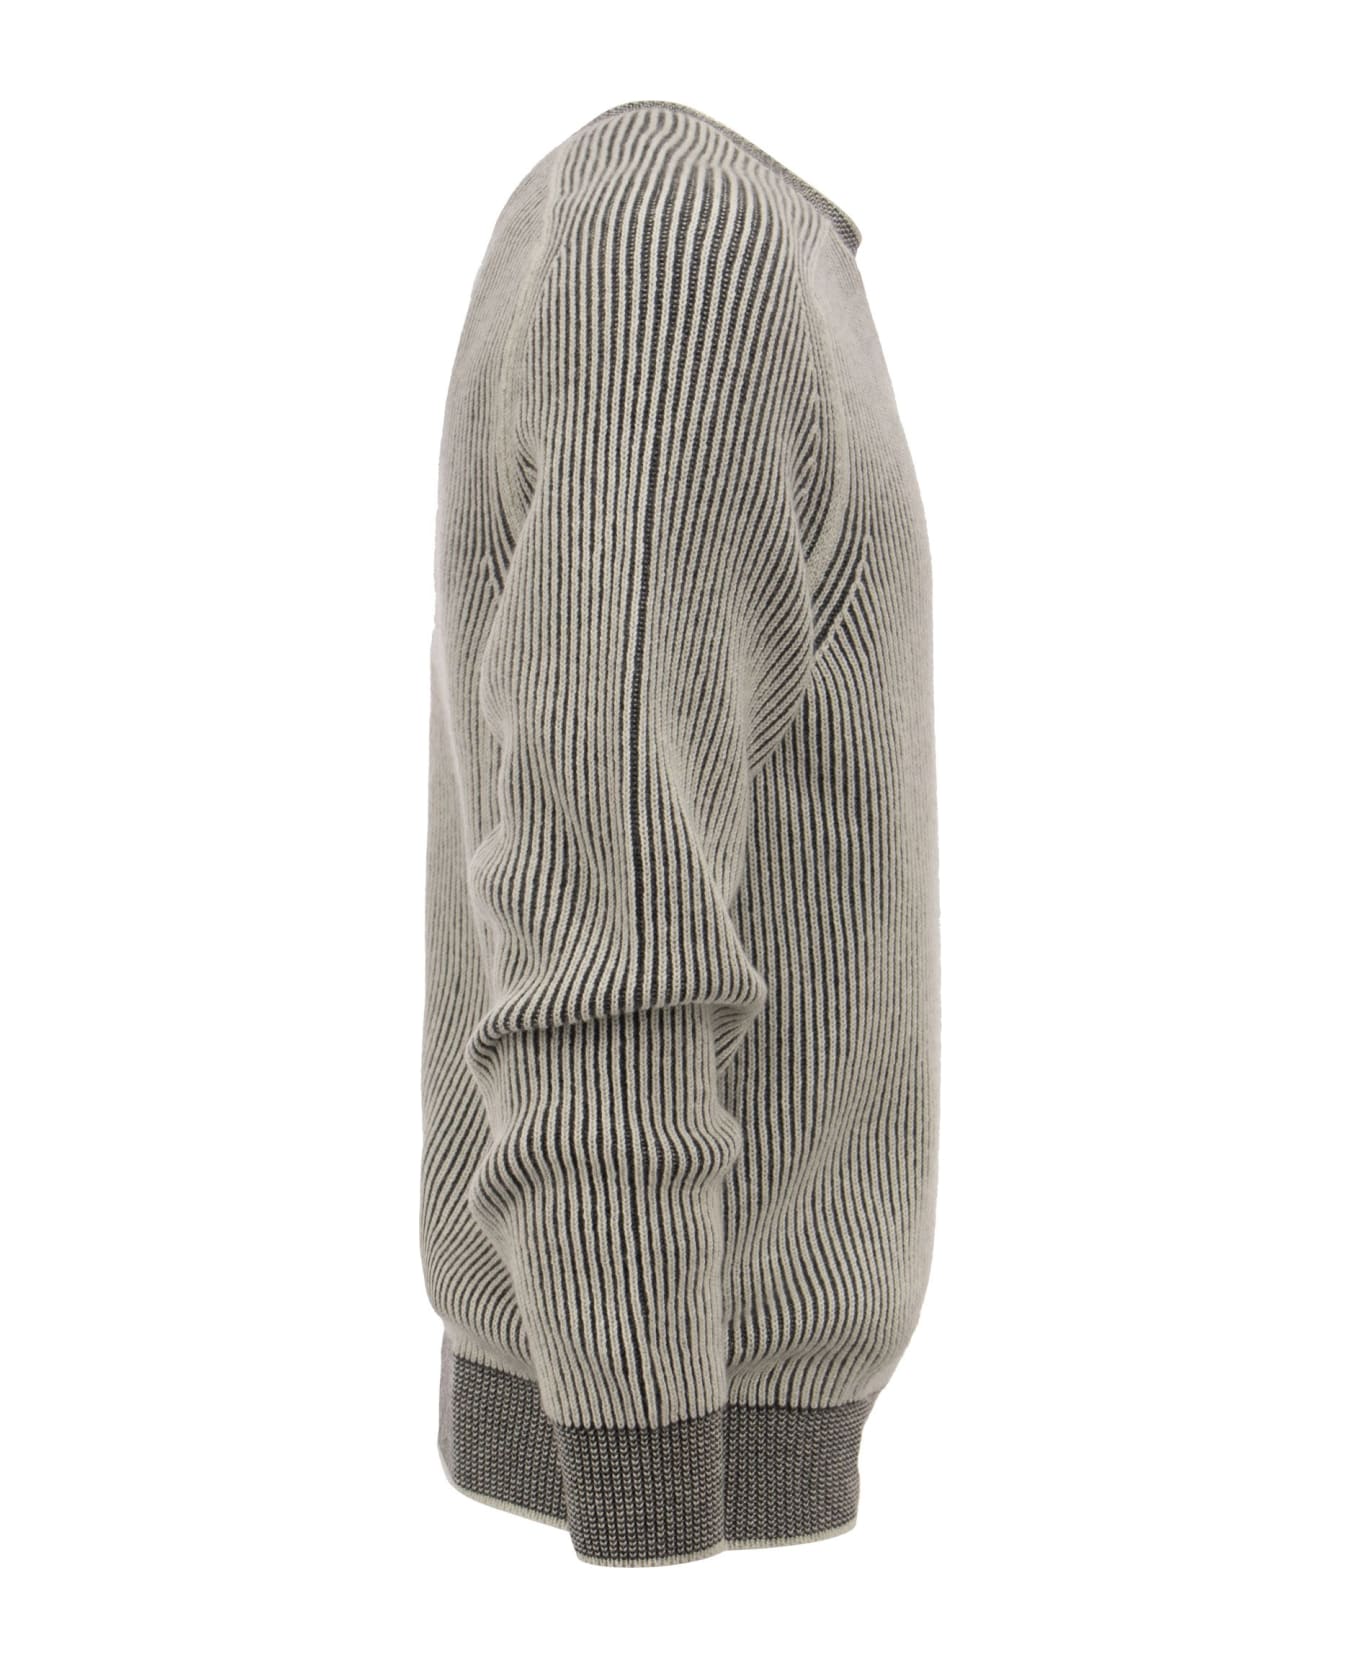 Sease Dinghy - Ribbed Cashmere Reversible Crew Neck Sweater - White